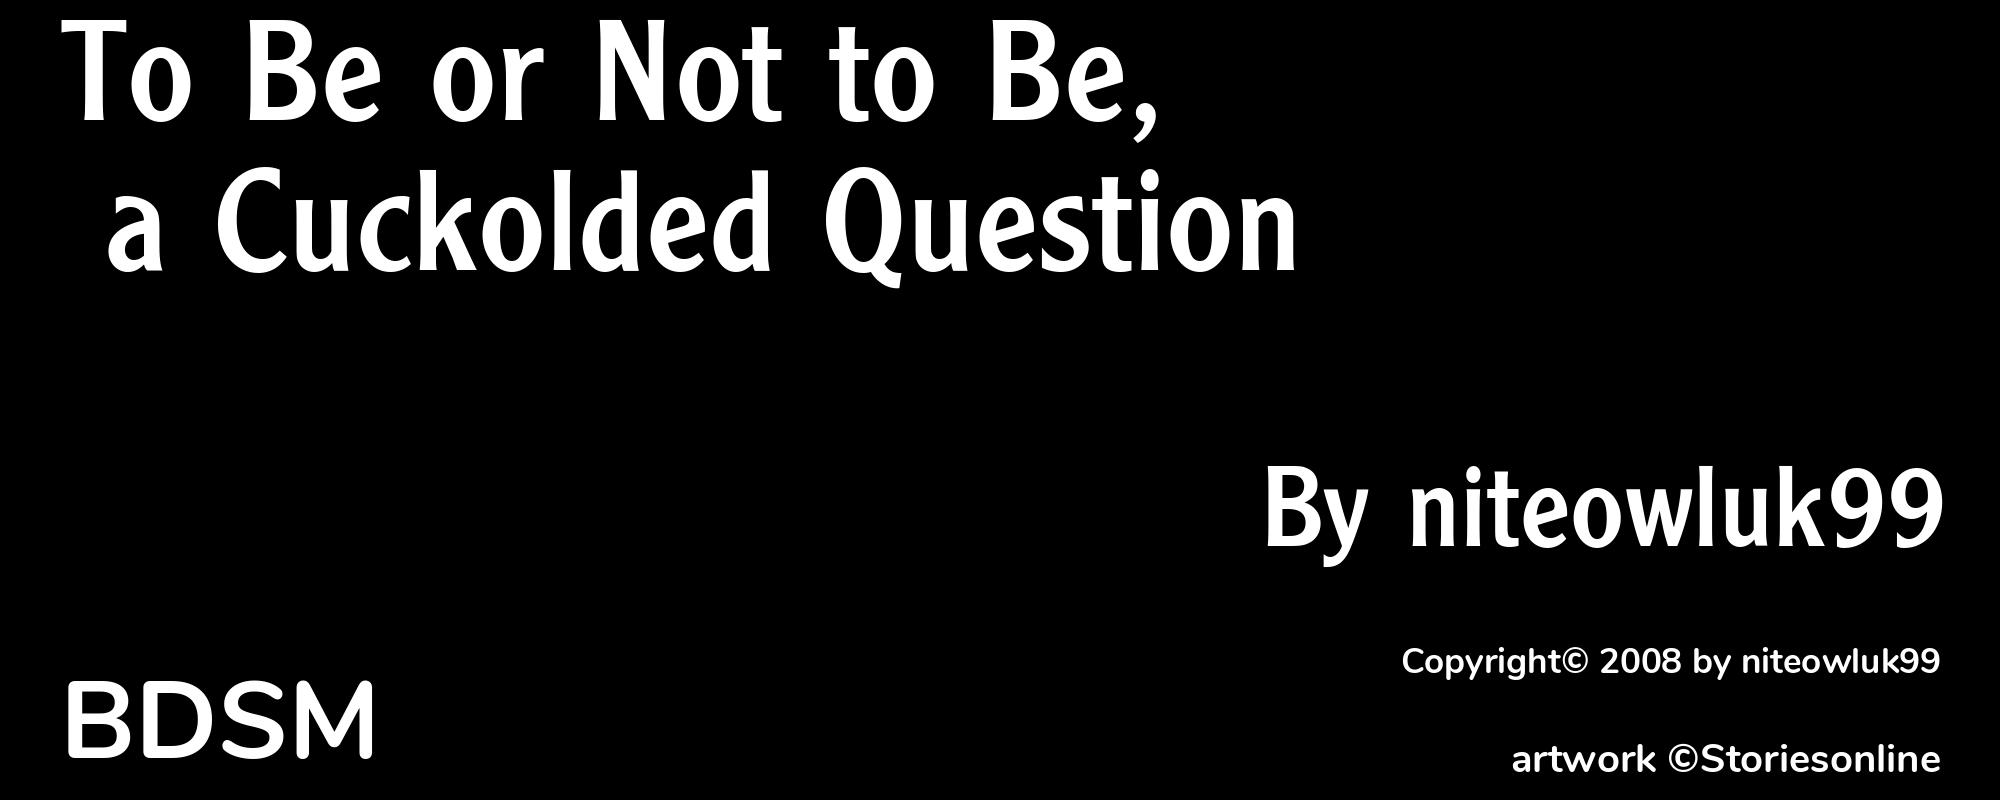 To Be or Not to Be, a Cuckolded Question - Cover